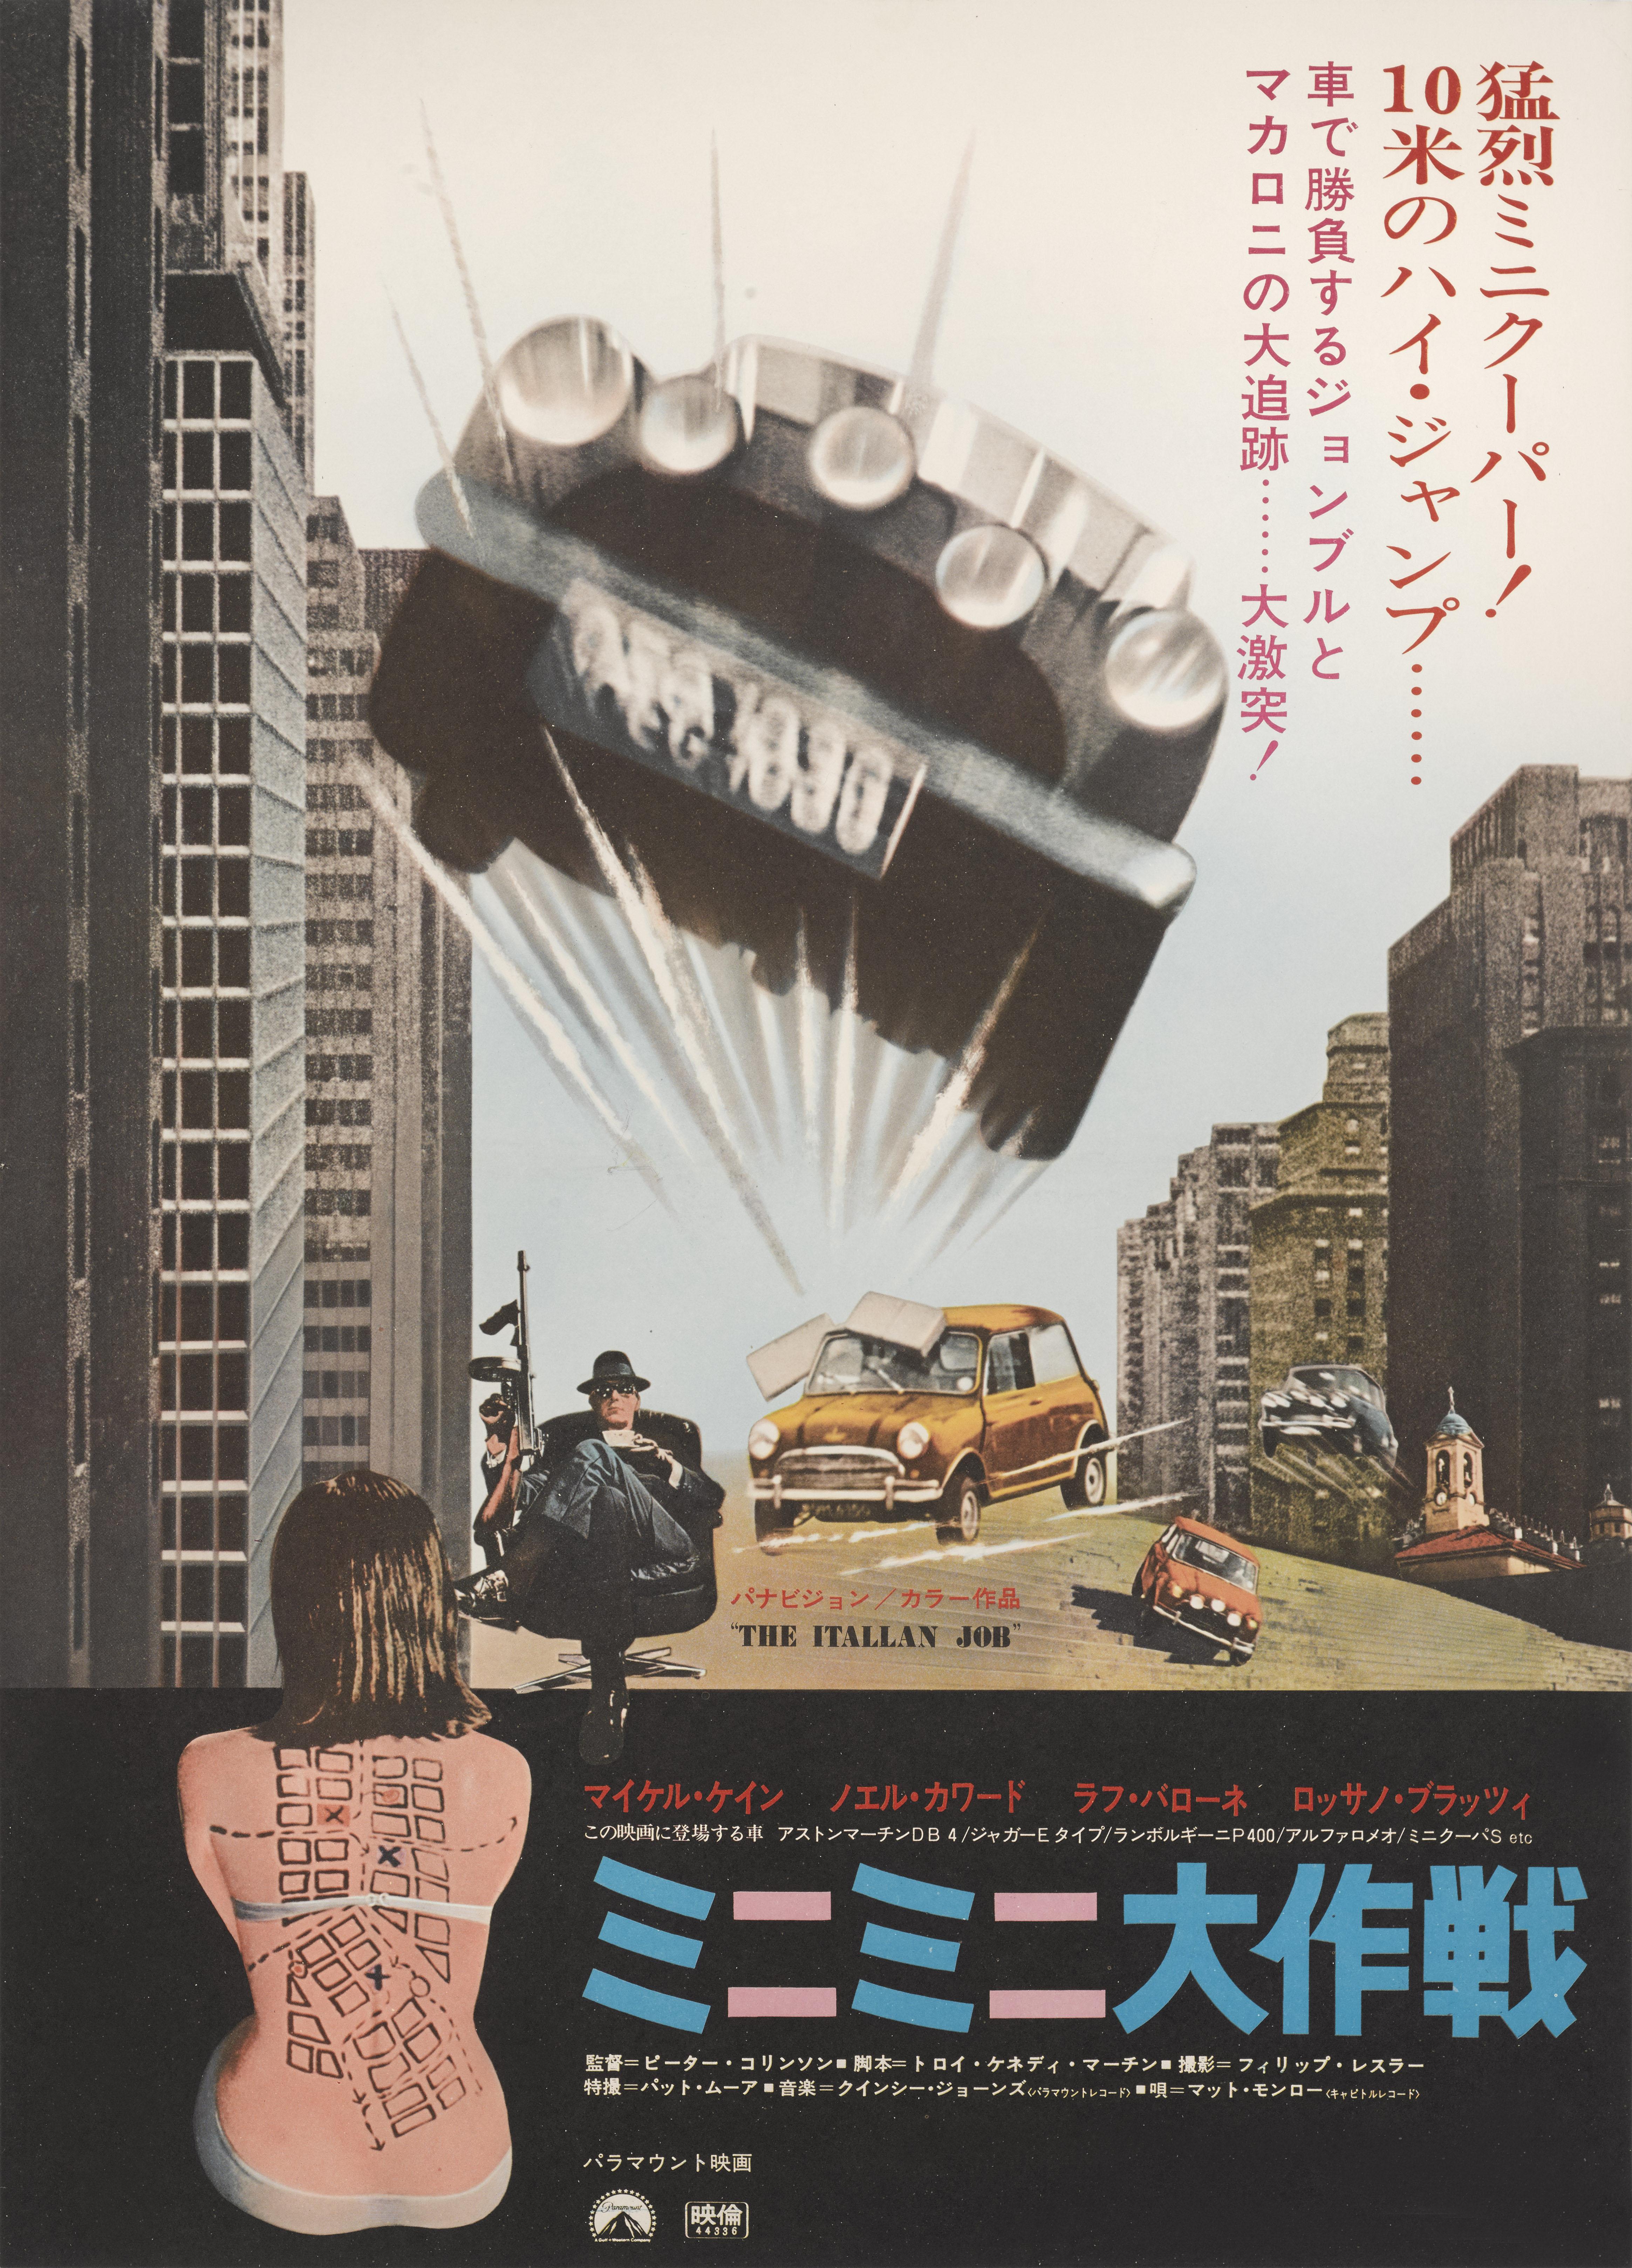 Original Japanese film poster for Michael Caine and Noel Coward's 1969 comic, crime caper about a plan to steal a gold shipment. The film was released one year later in Japan in 1970. This very cool artwork is unique to the films Japanese release.